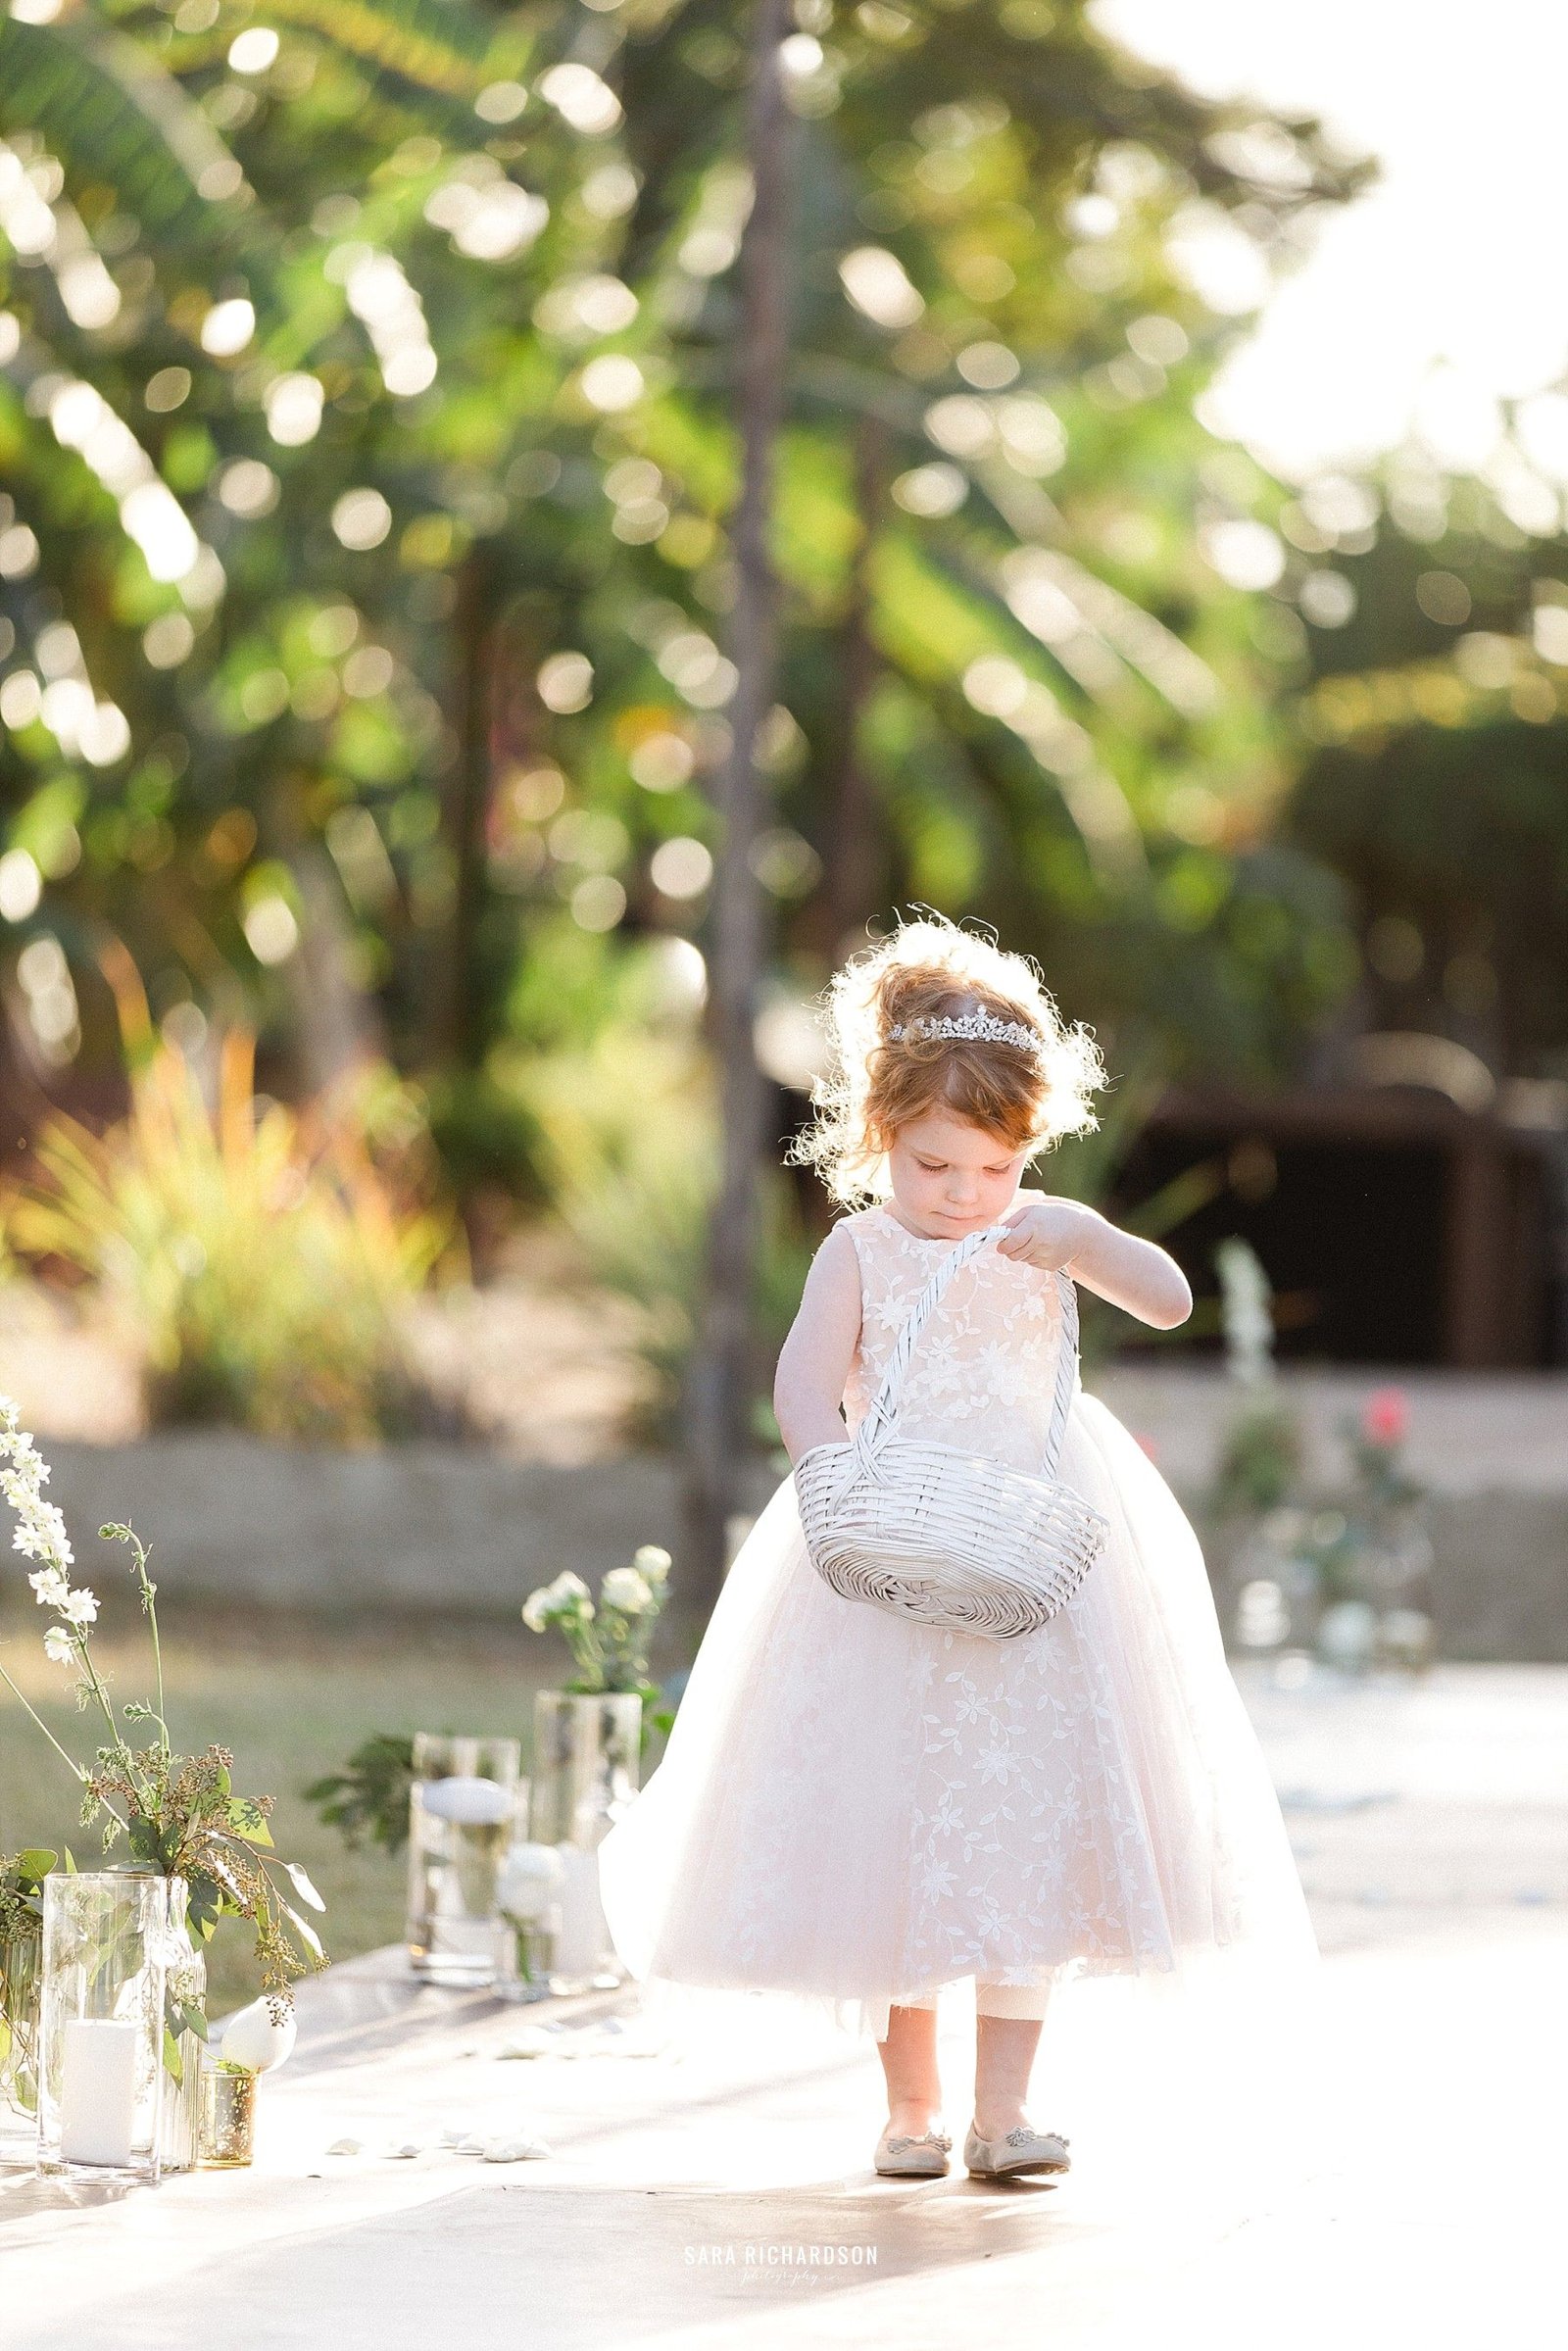 The cutest flower girl ever! She walked down that aisle and owned it! The Bride and Groom's photographer, Sara Richardson, was able to capture such beautiful moments!